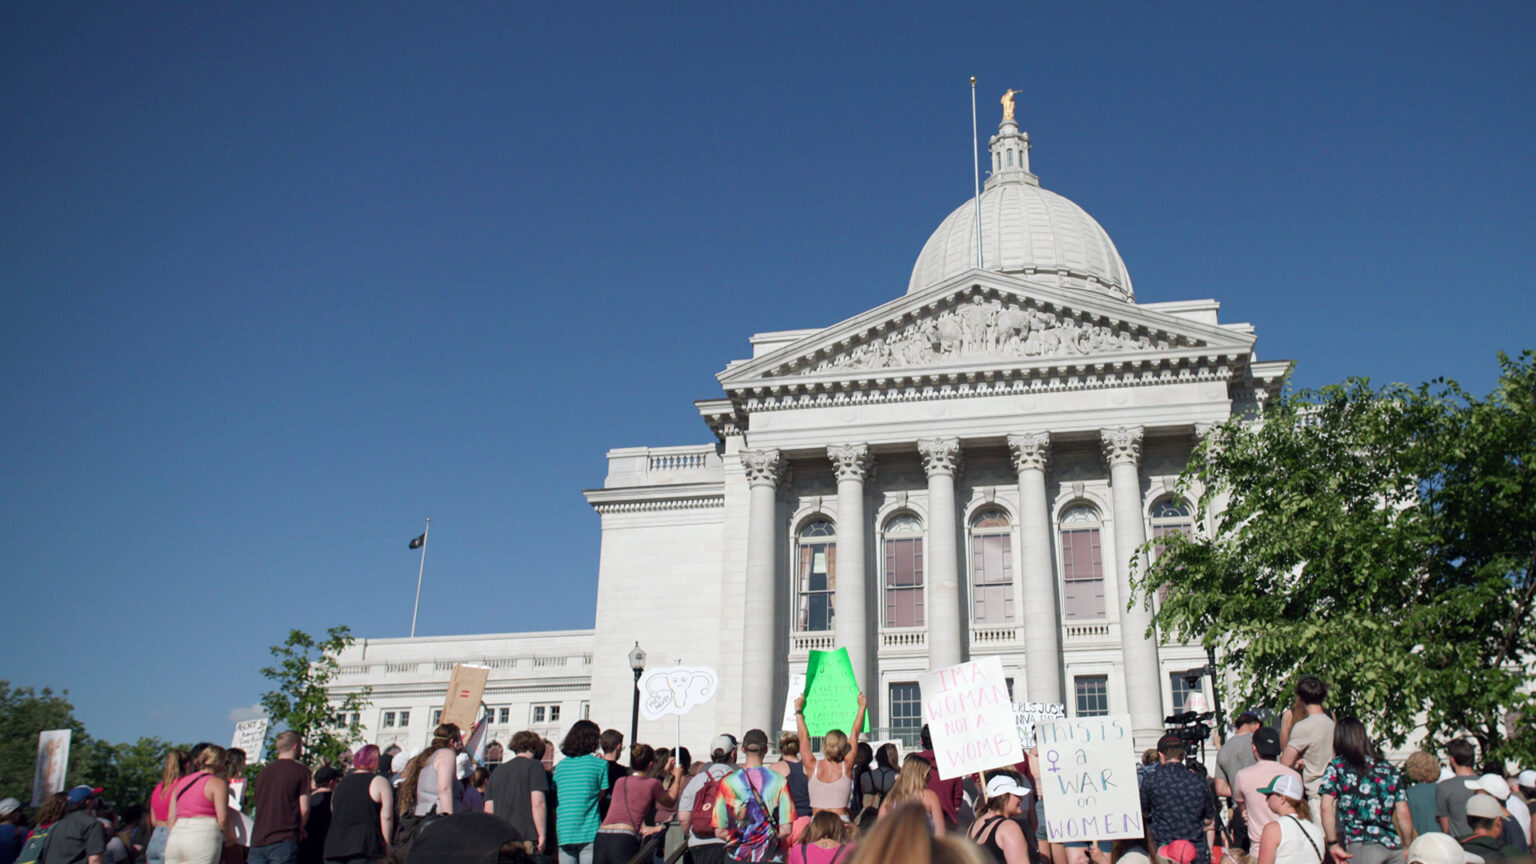 Protesters stand outside, with several holding hand-drawn signs, facing pillars, windows and a pediment on one wing of a multi-story masonry building topped with a dome and gilt statue.